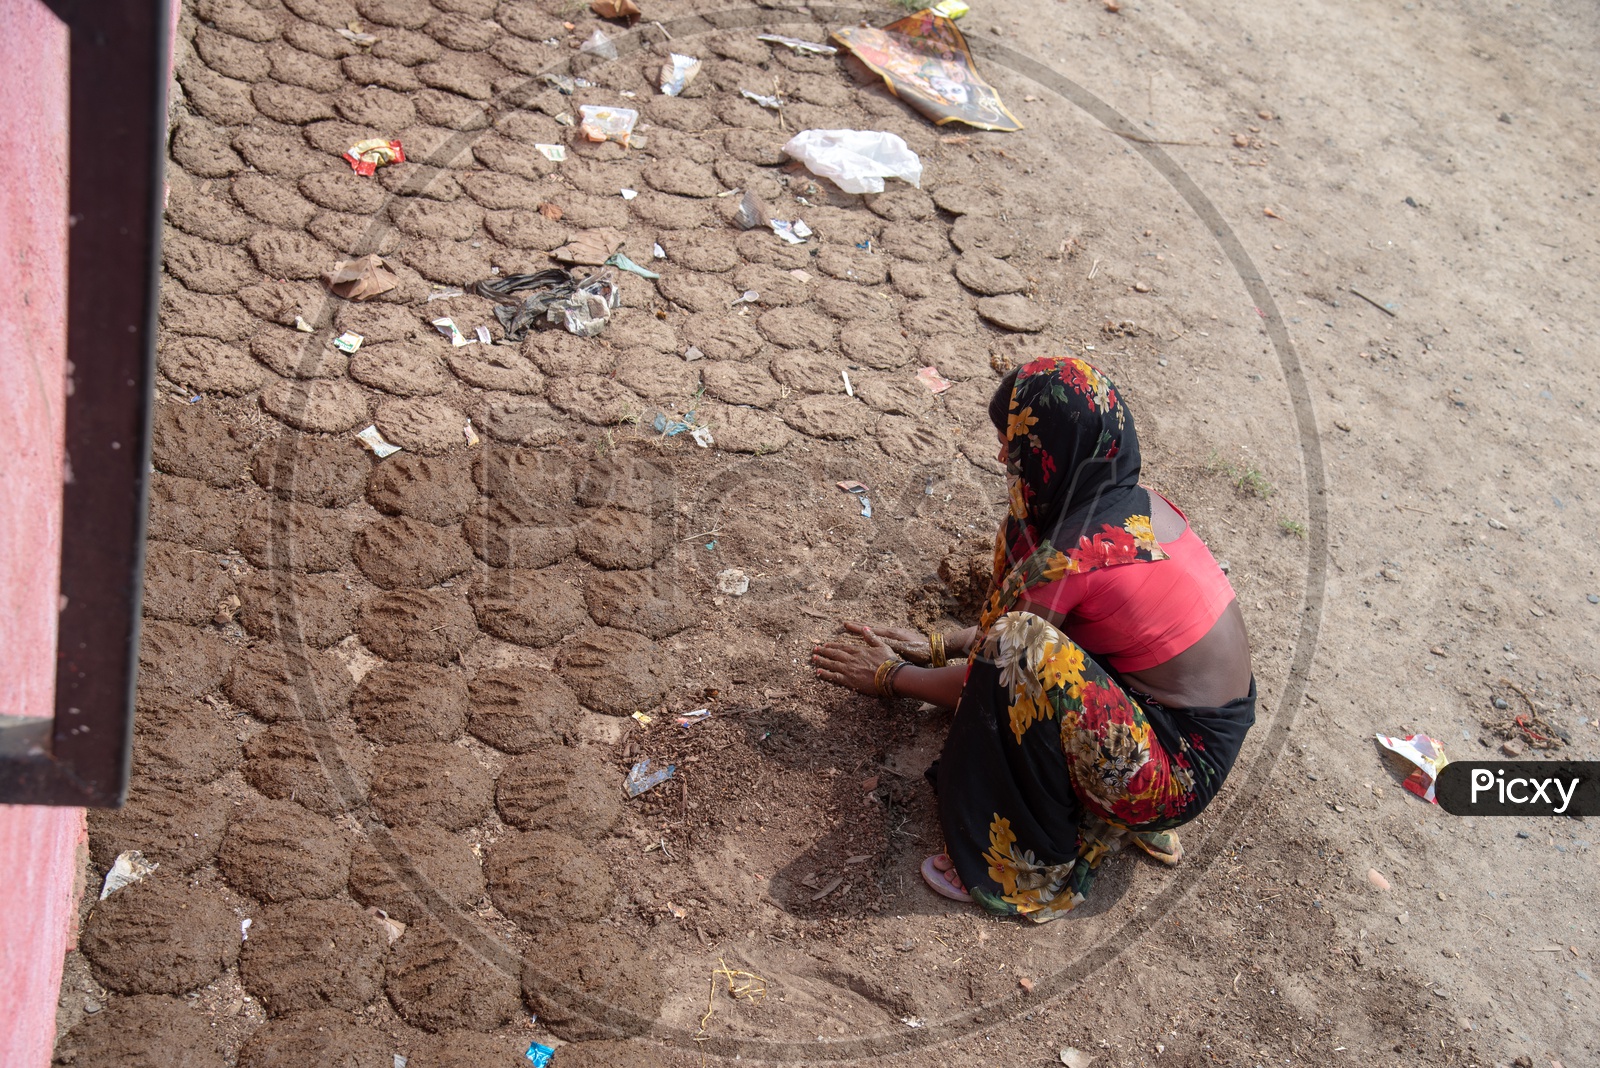 A Woman Making The Dry Dung Fuel or Dung Cakes  at Kangan Ghat or Chimney Ghat , Patna